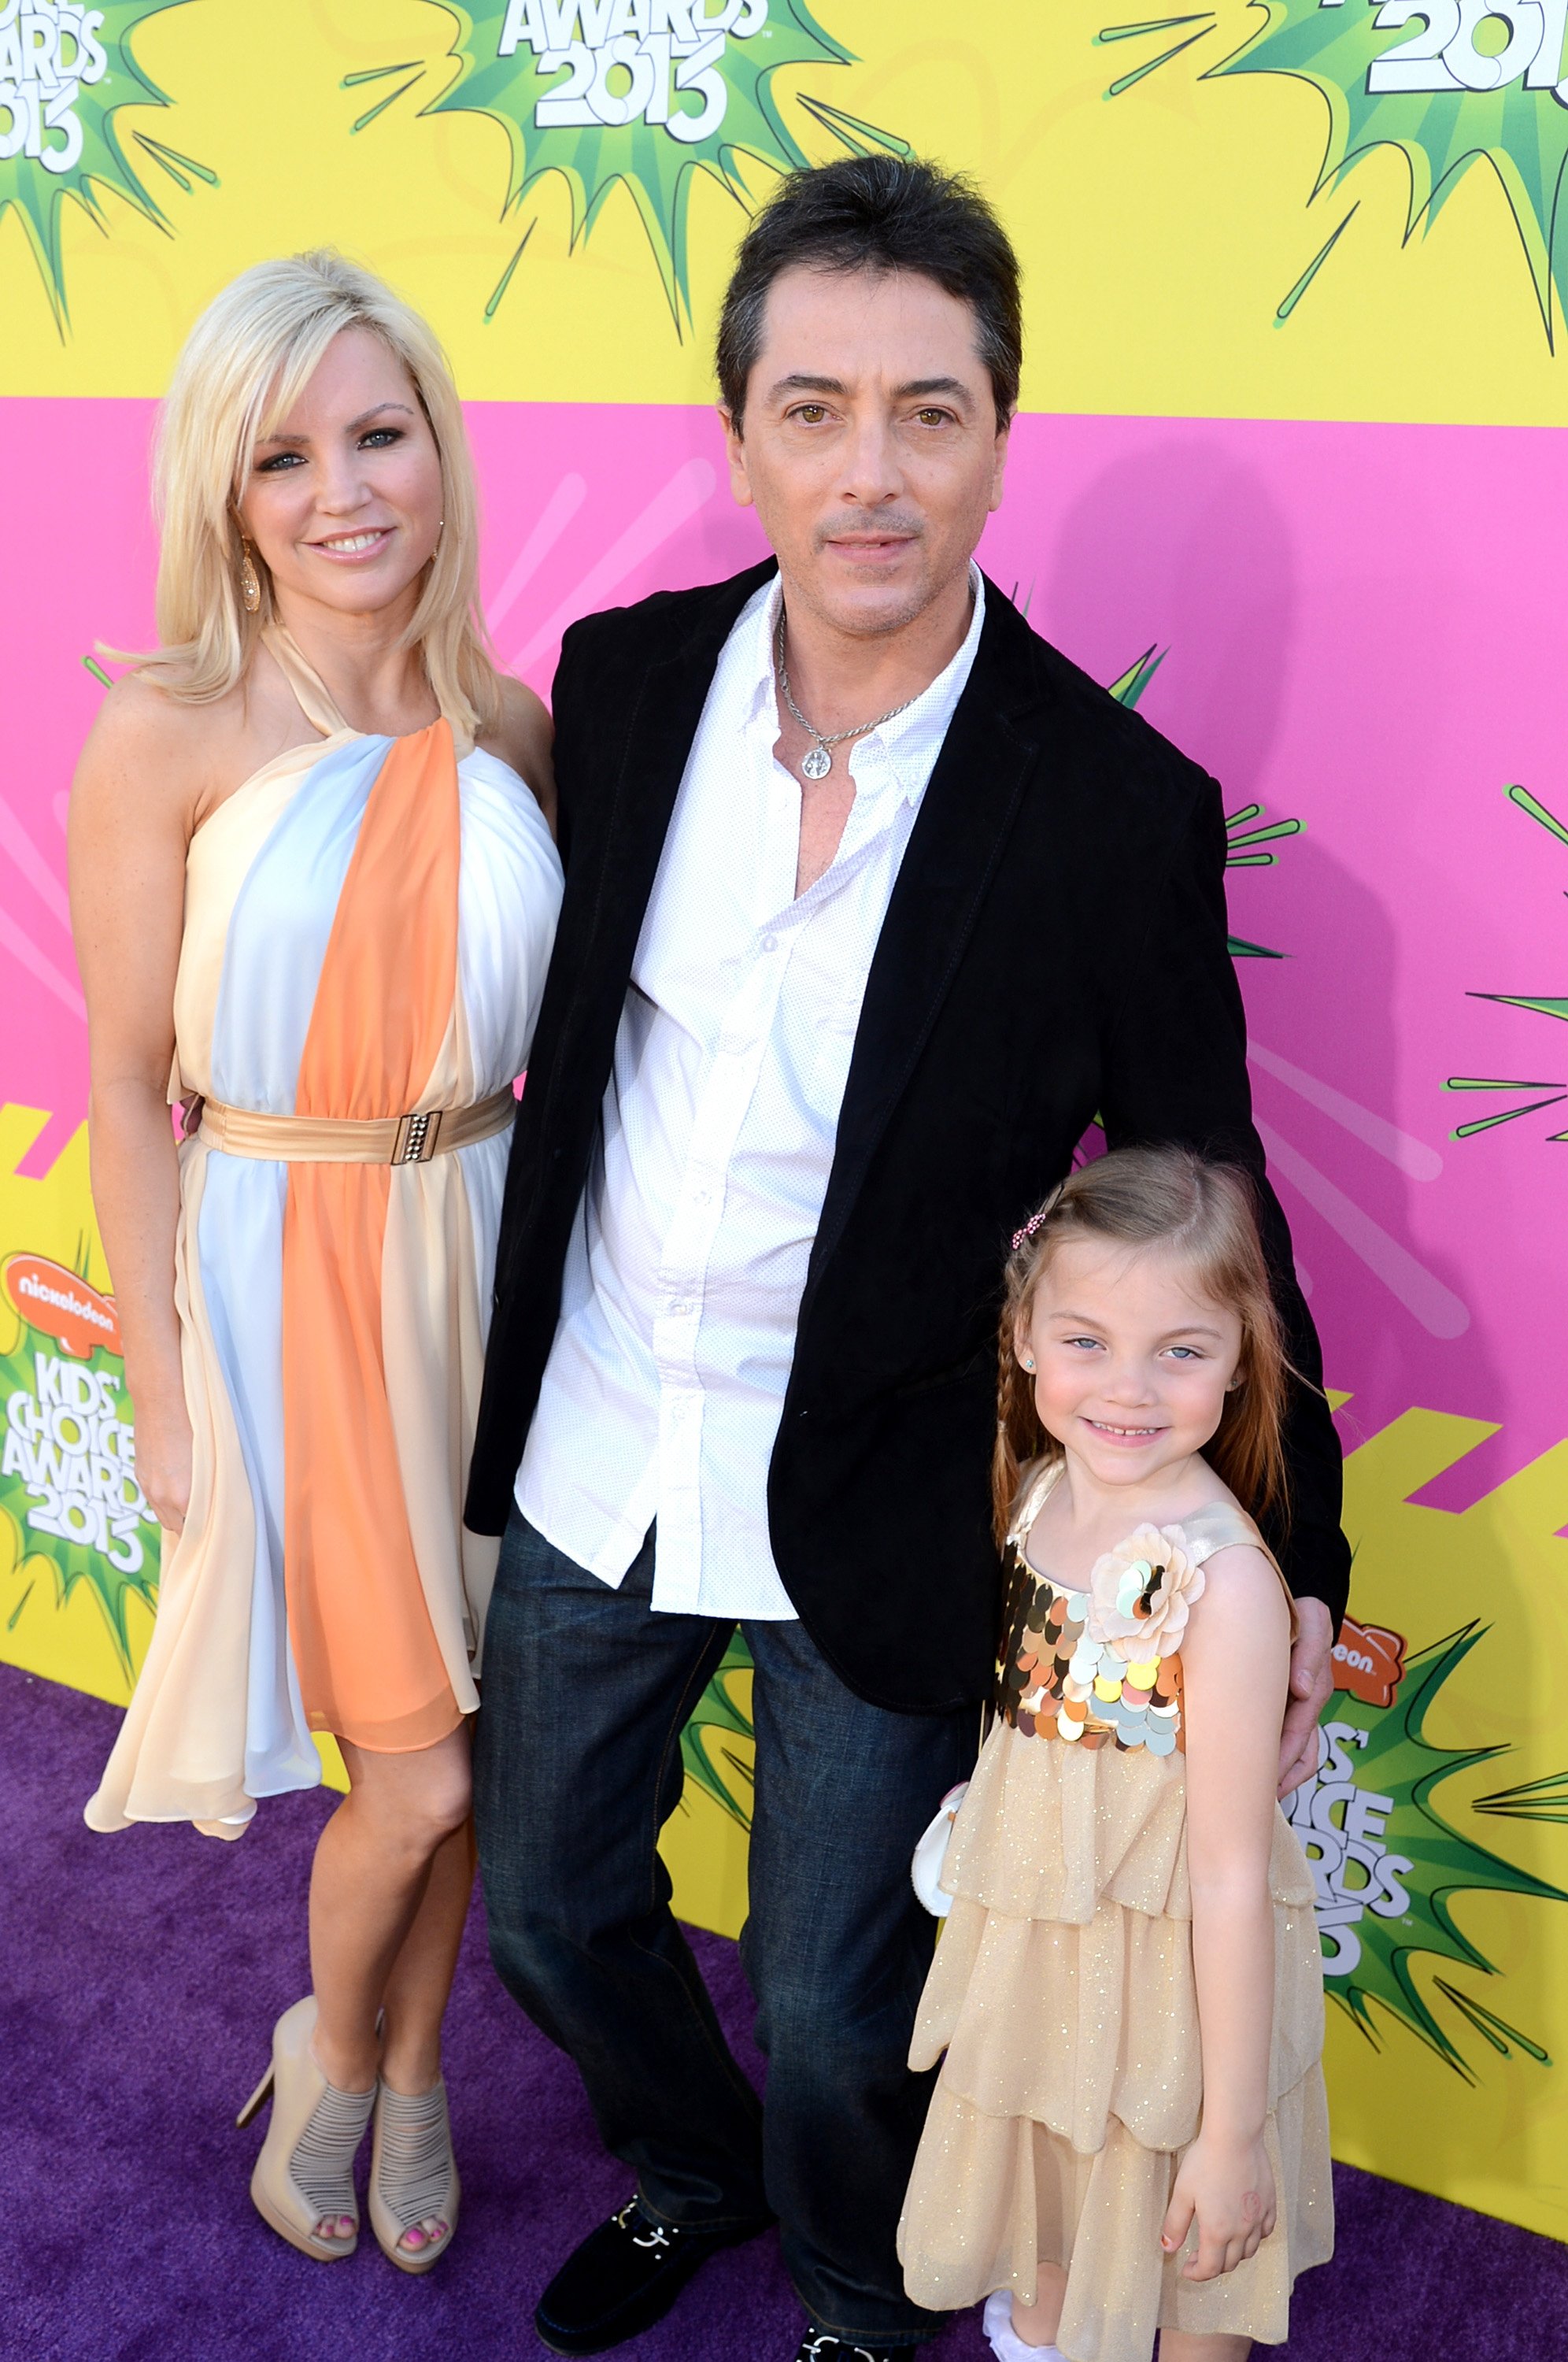 Scott Baio  with wife Renee Sloan and daughter Bailey at Nickelodeon's 26th Annual Kids' Choice Awards in 2013, in Los Angeles, California. | Source: Getty Images